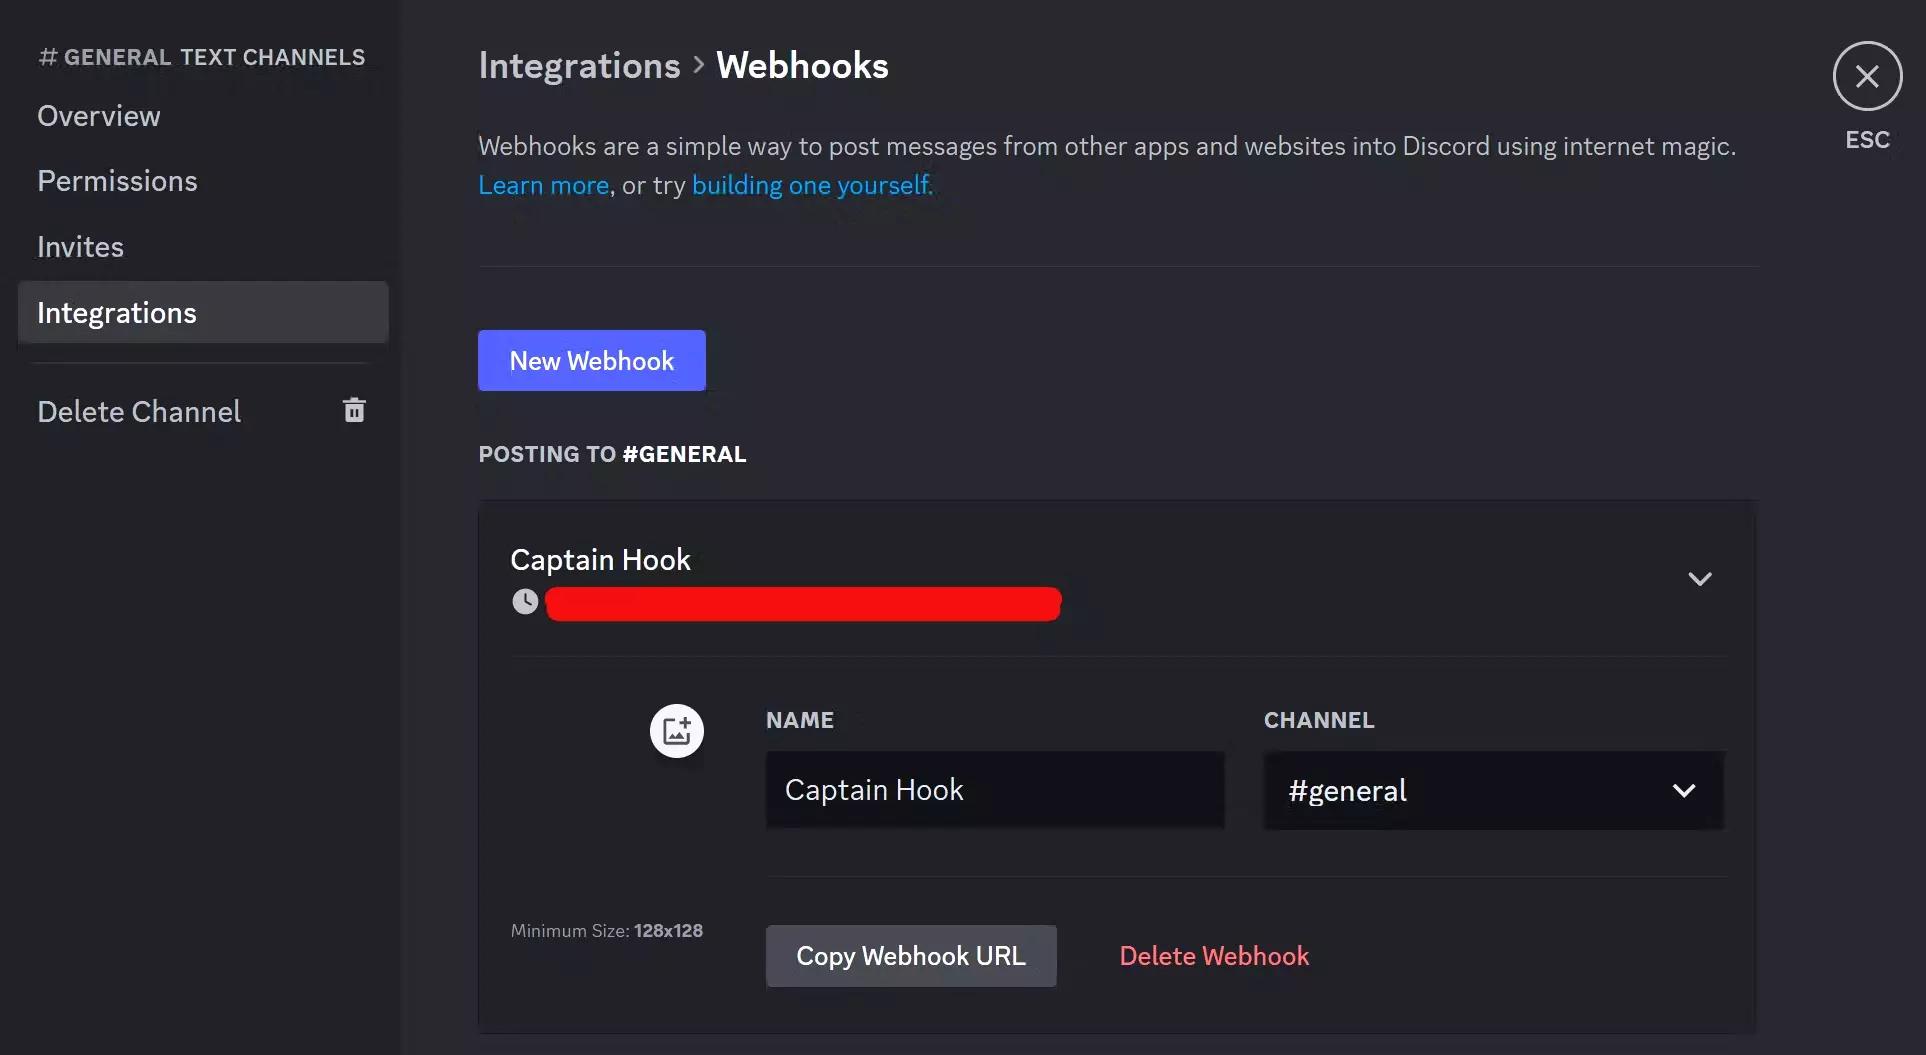 Discord webhook is sensitive, so do not share it publicly.